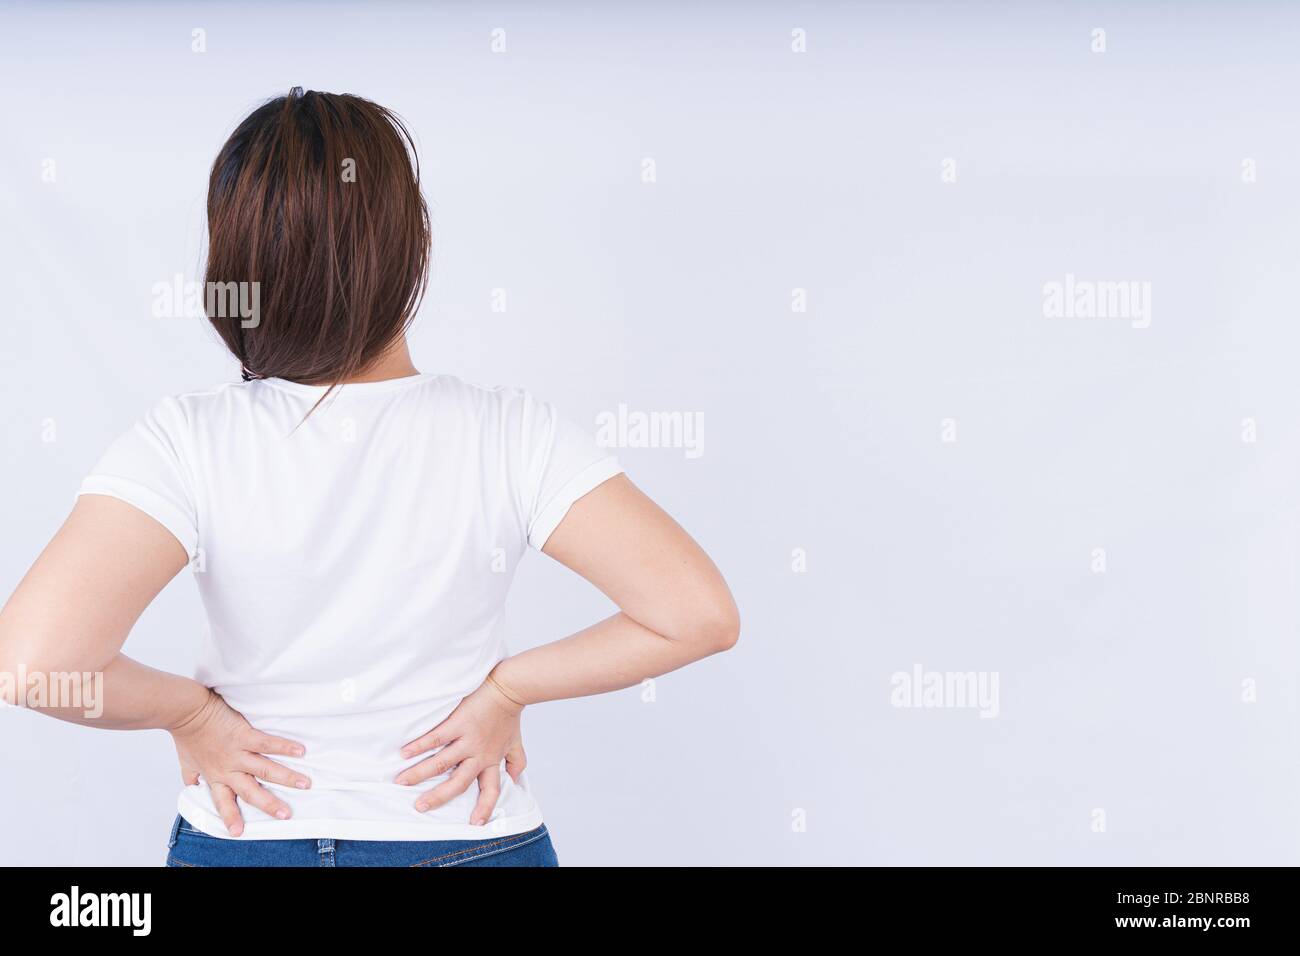 Female touching acute lower back pain on white background with copy space. Medical, healthcare for advertising concept. Stock Photo